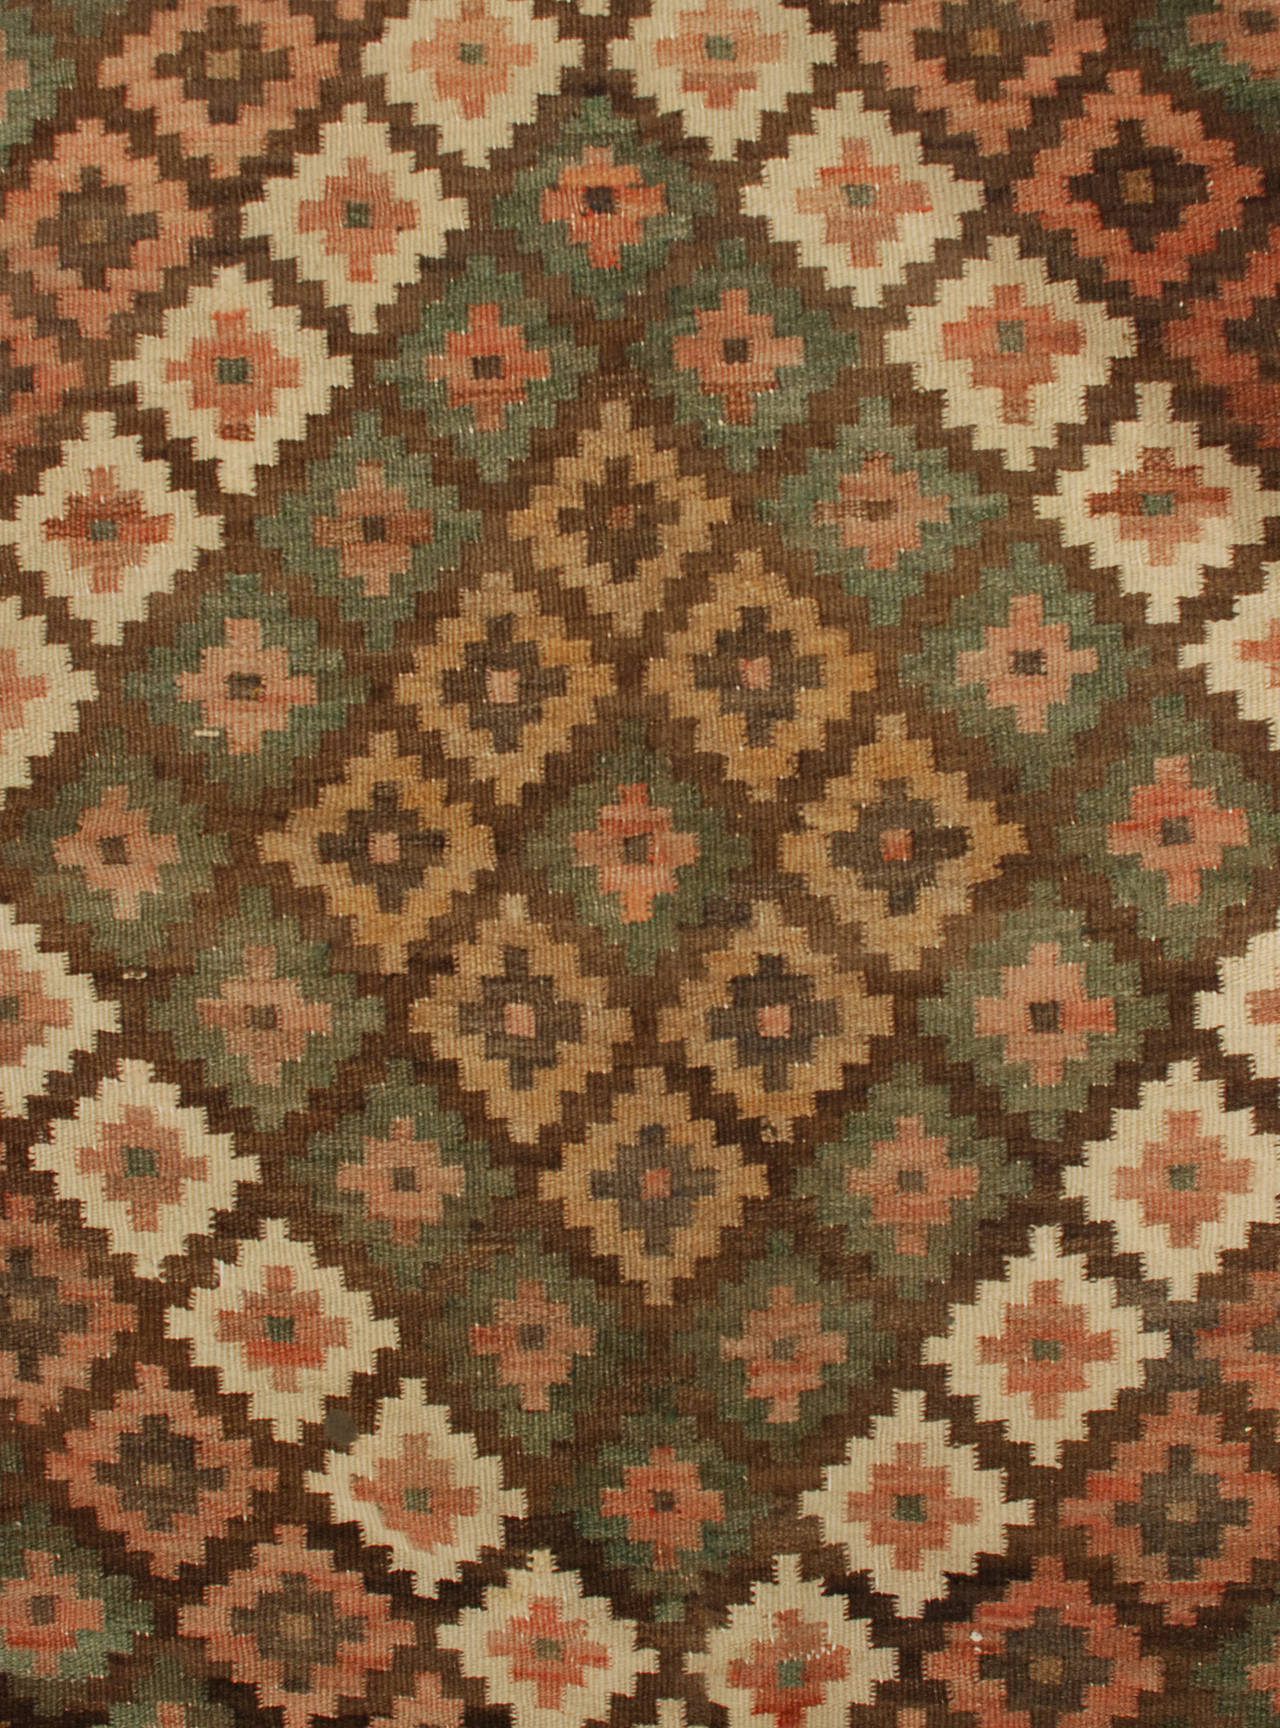 An early 20th century Persian, Saveh Kilim rug with three large diamond medallions consisting of alternating multicolored geometric motifs, surrounded by complementary geometric borders.